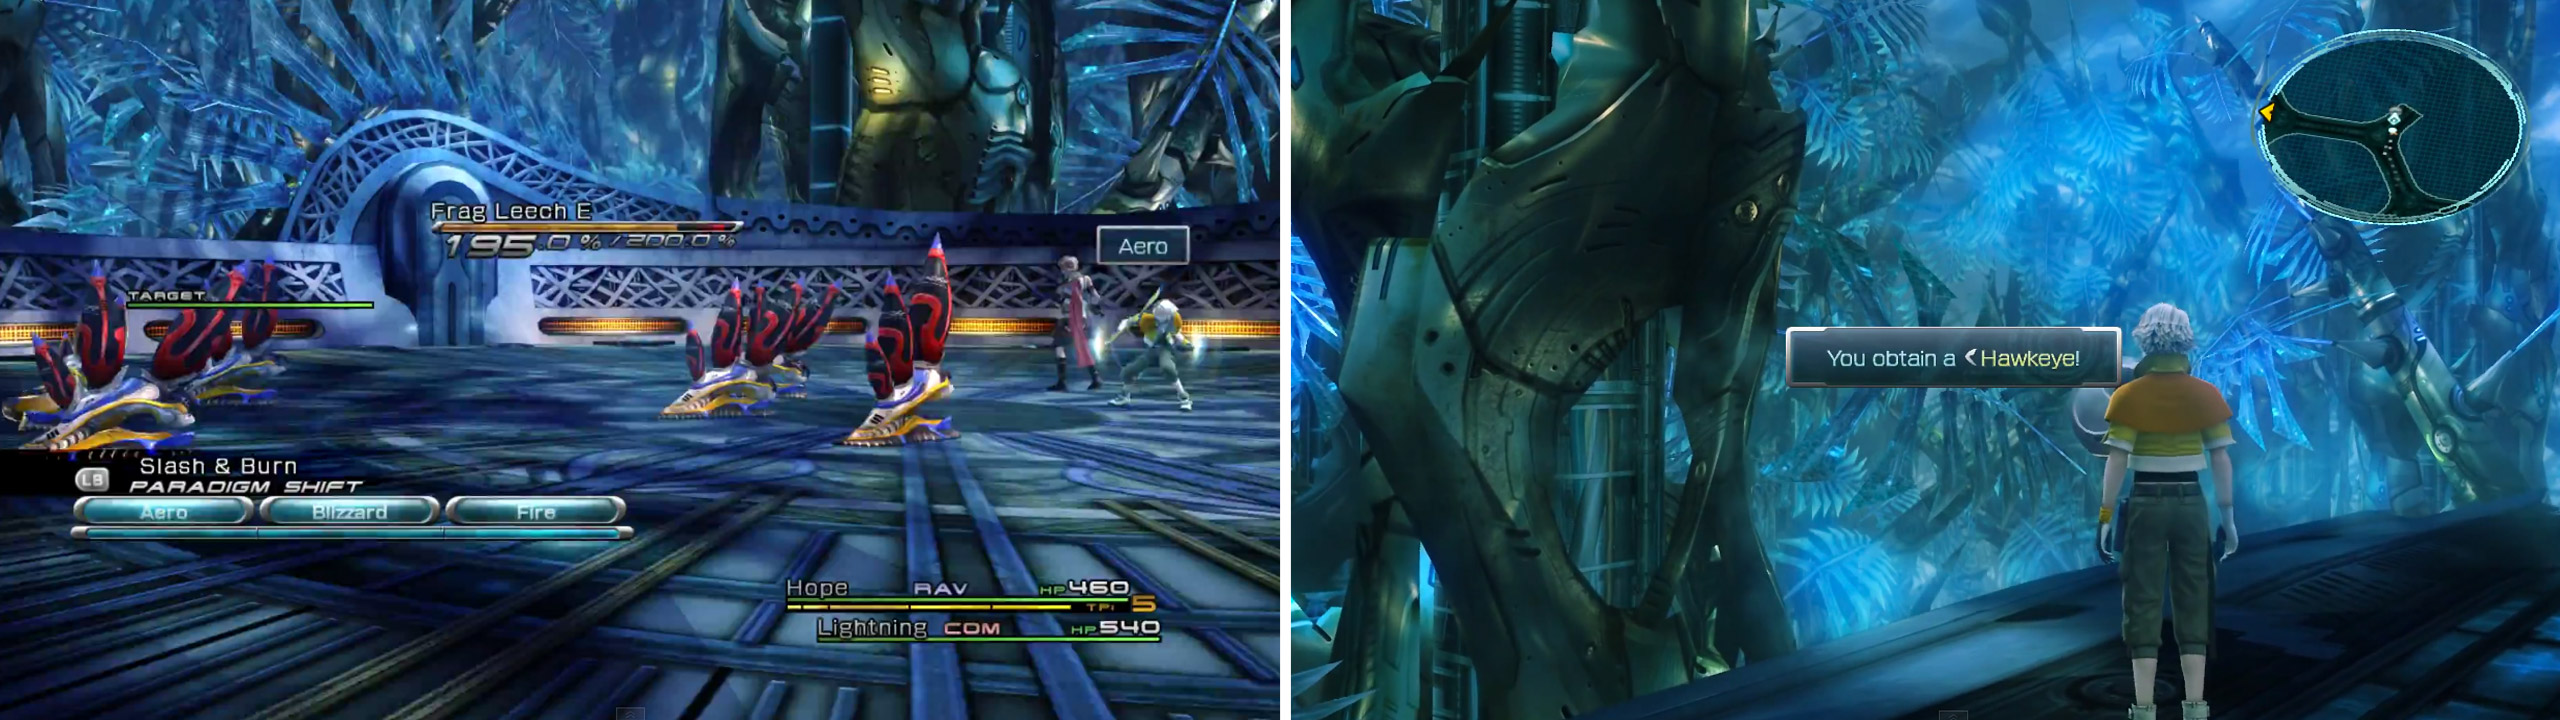 Fight the 6x Frag Leech (left) and then collect the Hawkeye weapon for Hope (right).